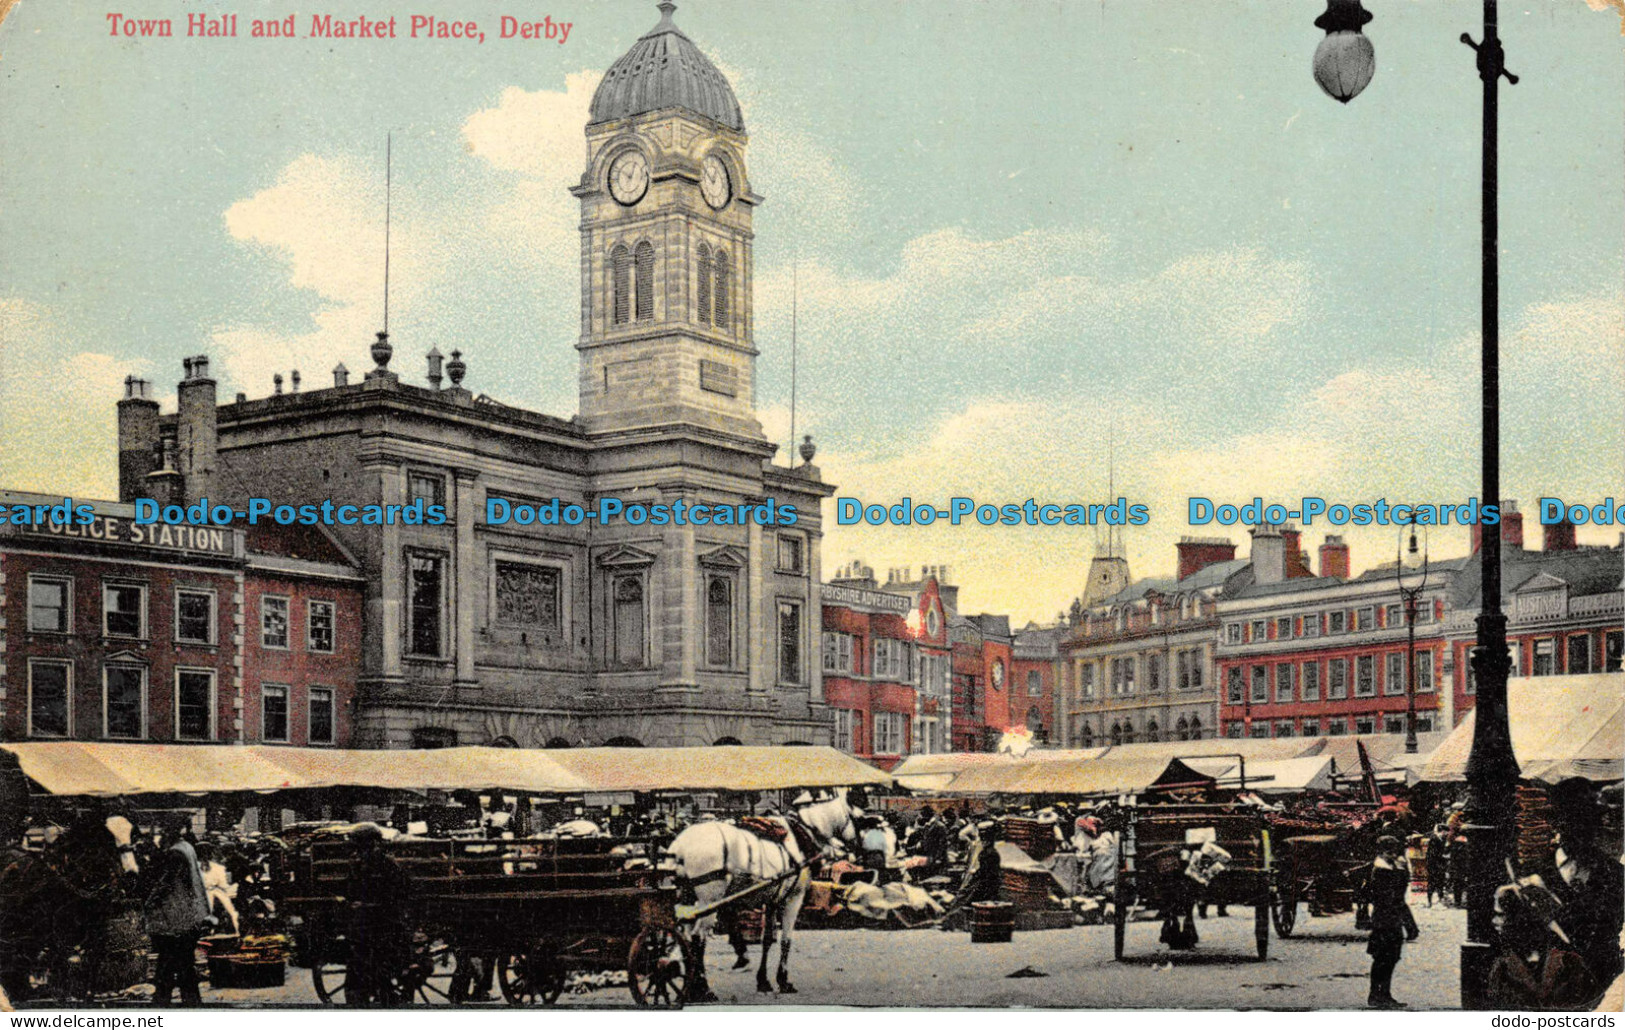 R076022 Town Hall And Market Place. Derby. Boots Cash Chemists Pelham Series. 19 - World